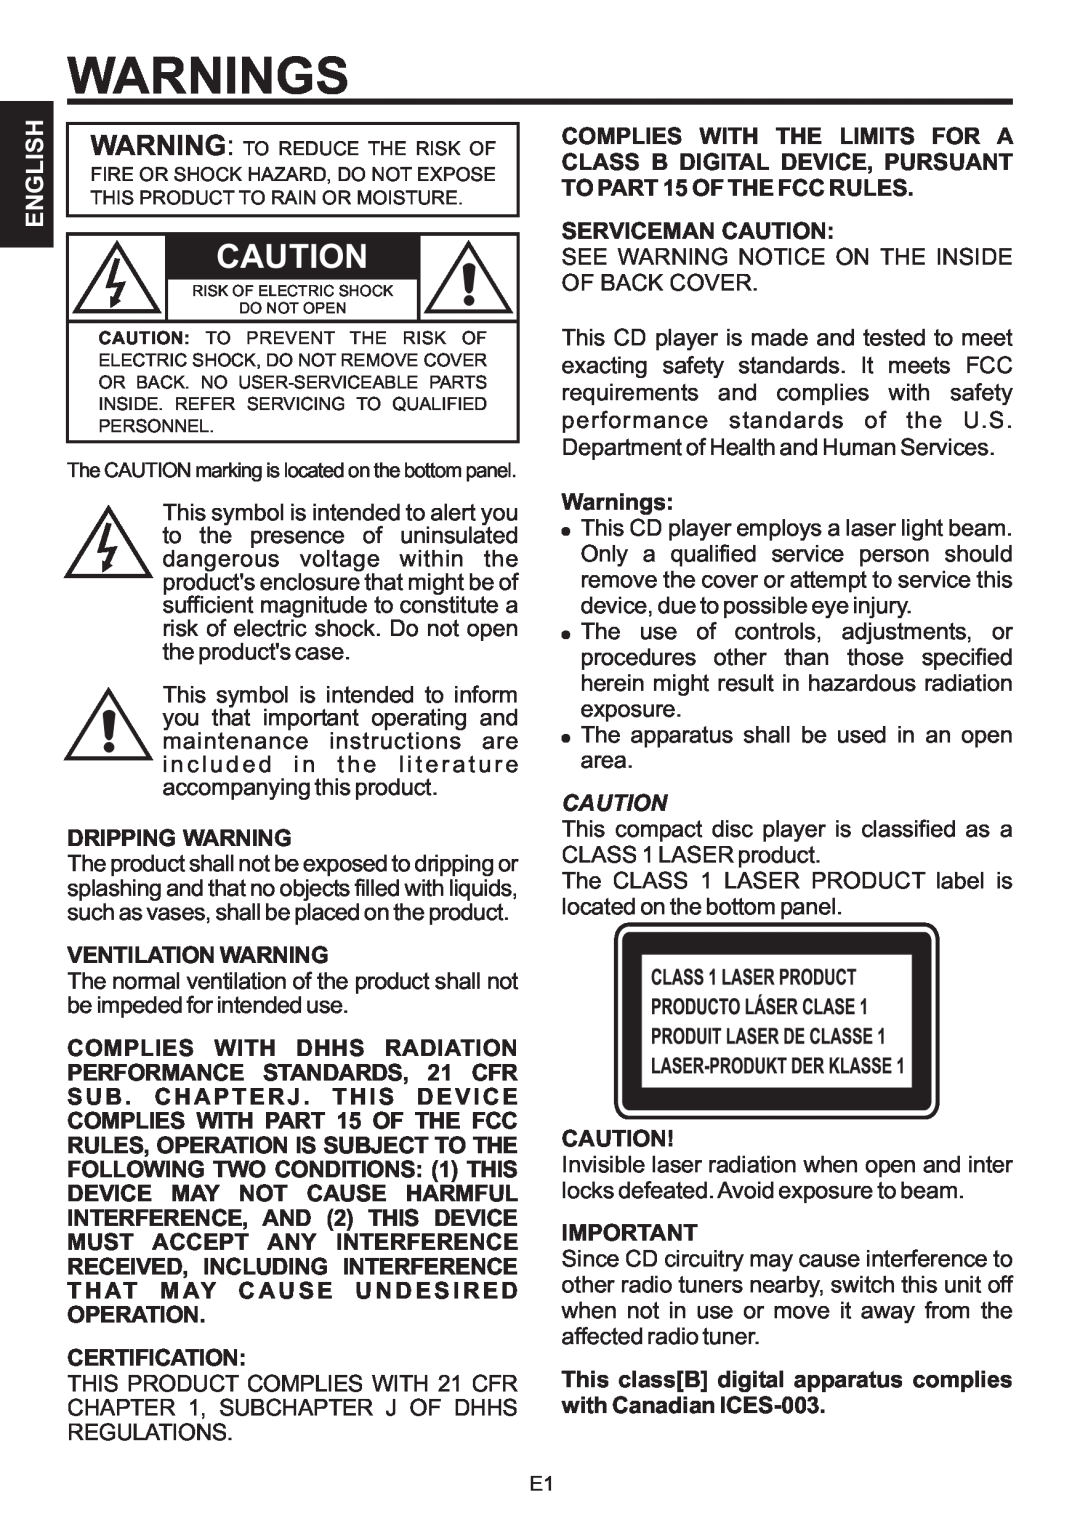 The Singing Machine SMB-664 Warnings, English, Complies With The Limits For A, Class B Digital Device, Pursuant 